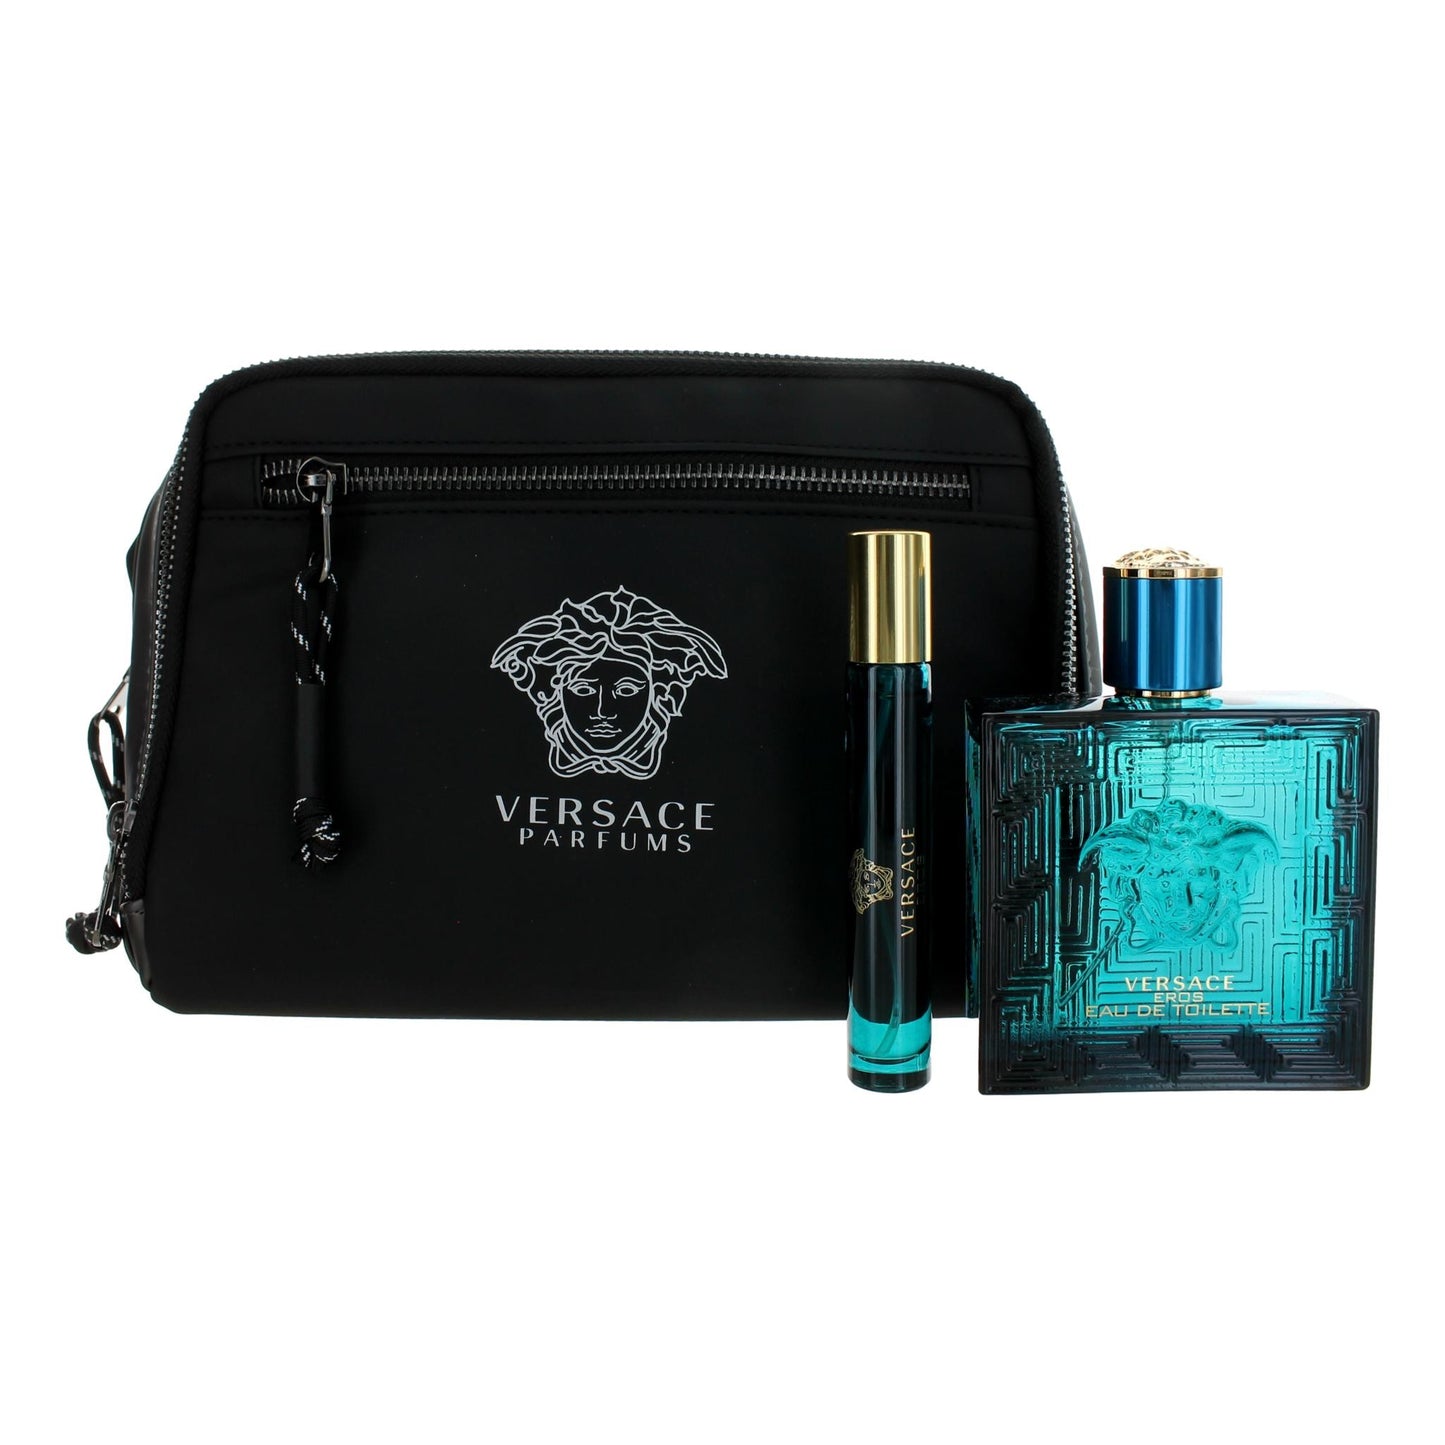 Bottle of Eros by Versace, 3 Piece Gift Set for Men with Travel Trousse